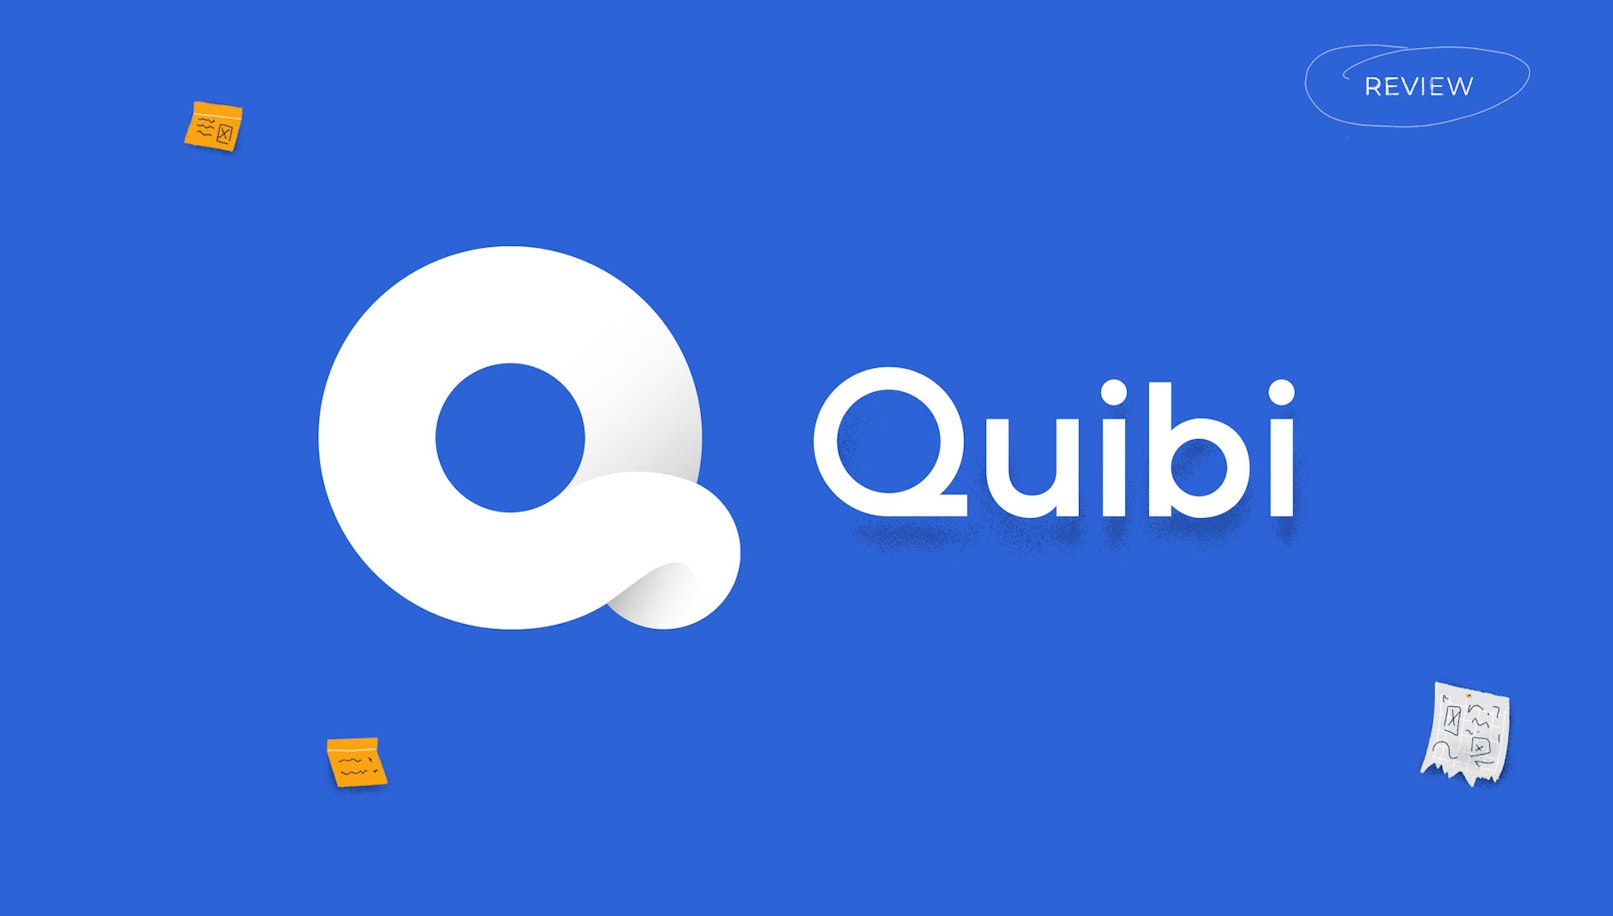 Quibi App Review on the UX Experience